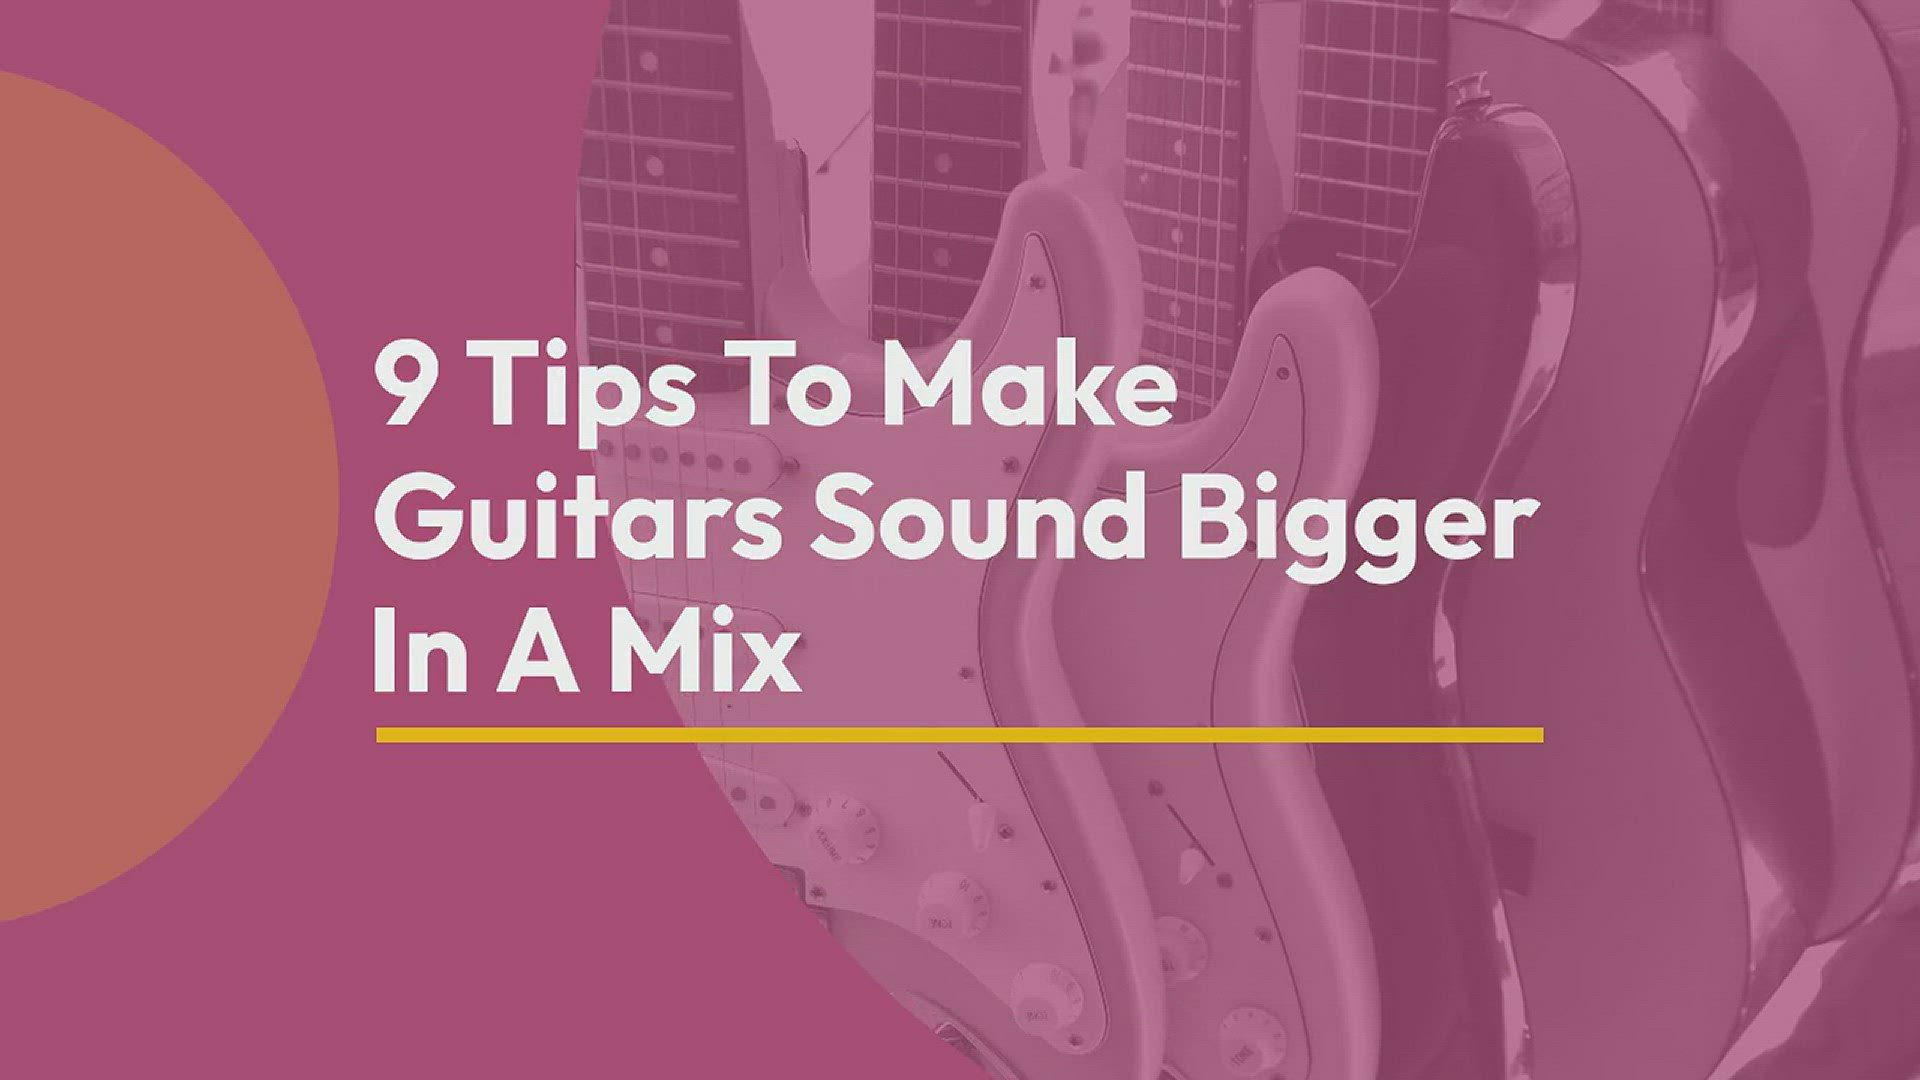 'Video thumbnail for 9 Tips to make guitars sound bigger in a mix'